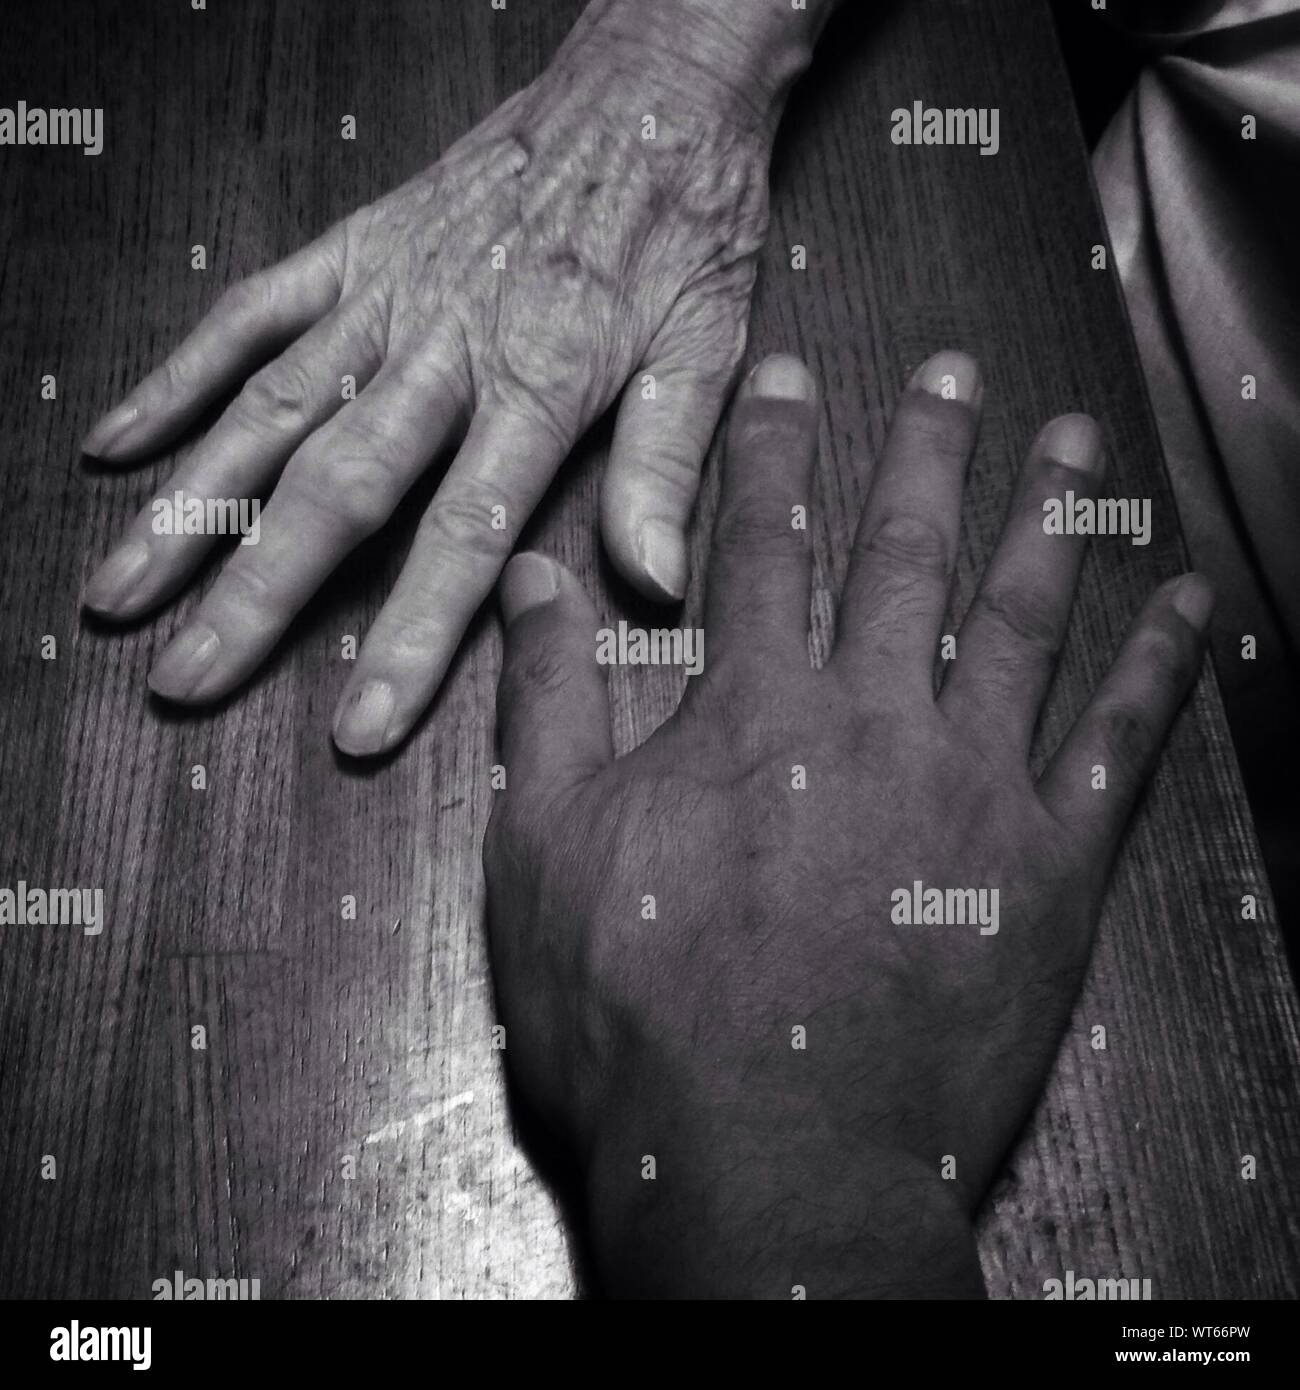 Hands Showing Aging Process Concept Stock Photo